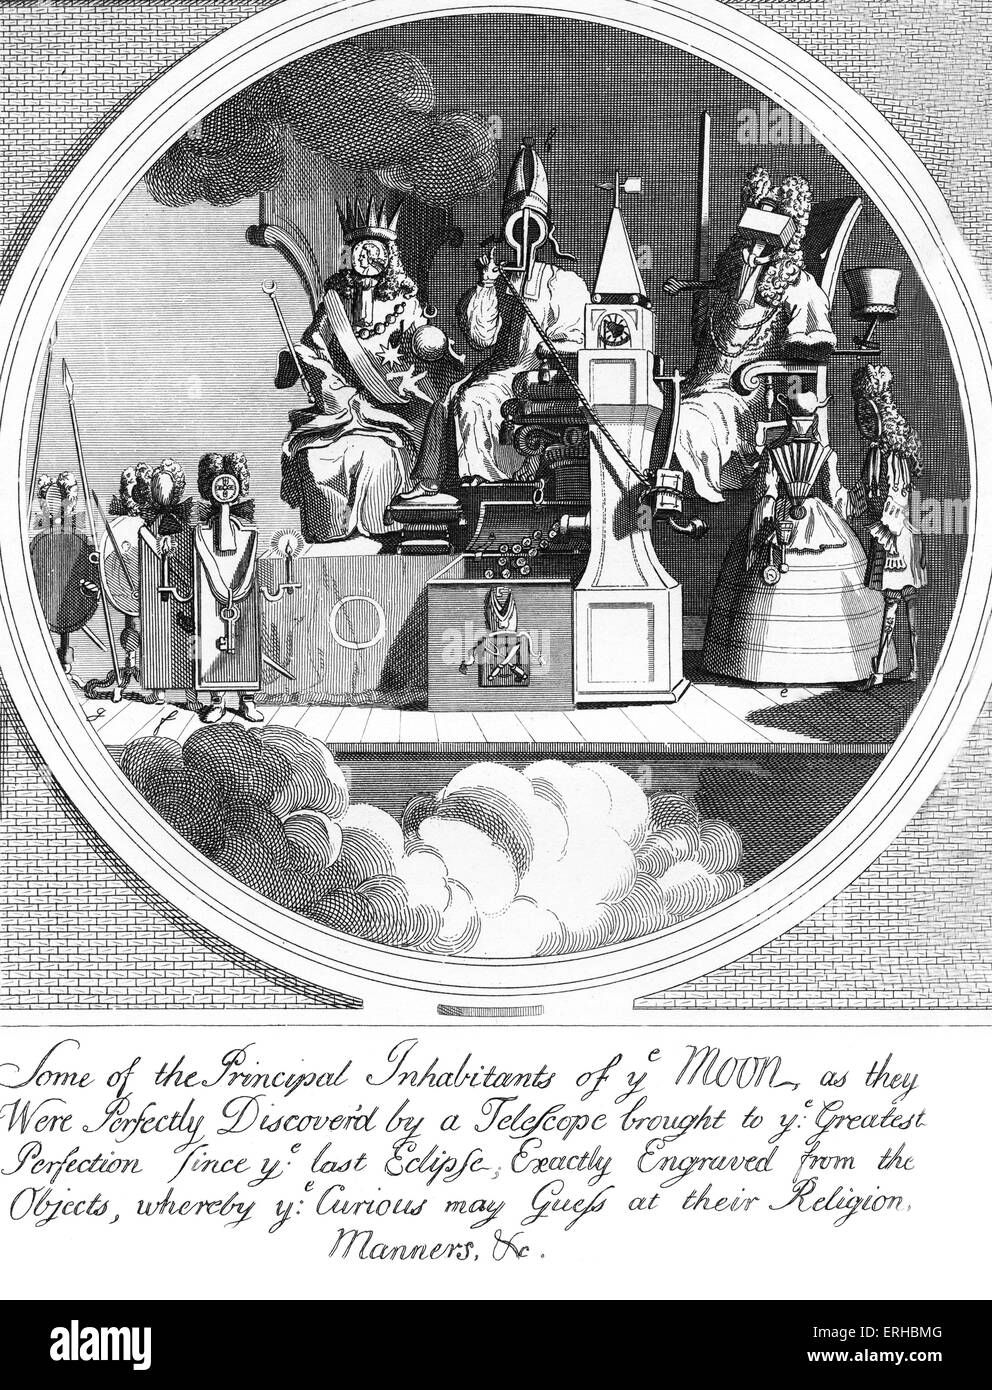 Royalty, Episcopacy, and Law  by W. Hogarth 1724 Caption reads: Some of the Principal Inhabitants of ye Moon, as they Were Stock Photo